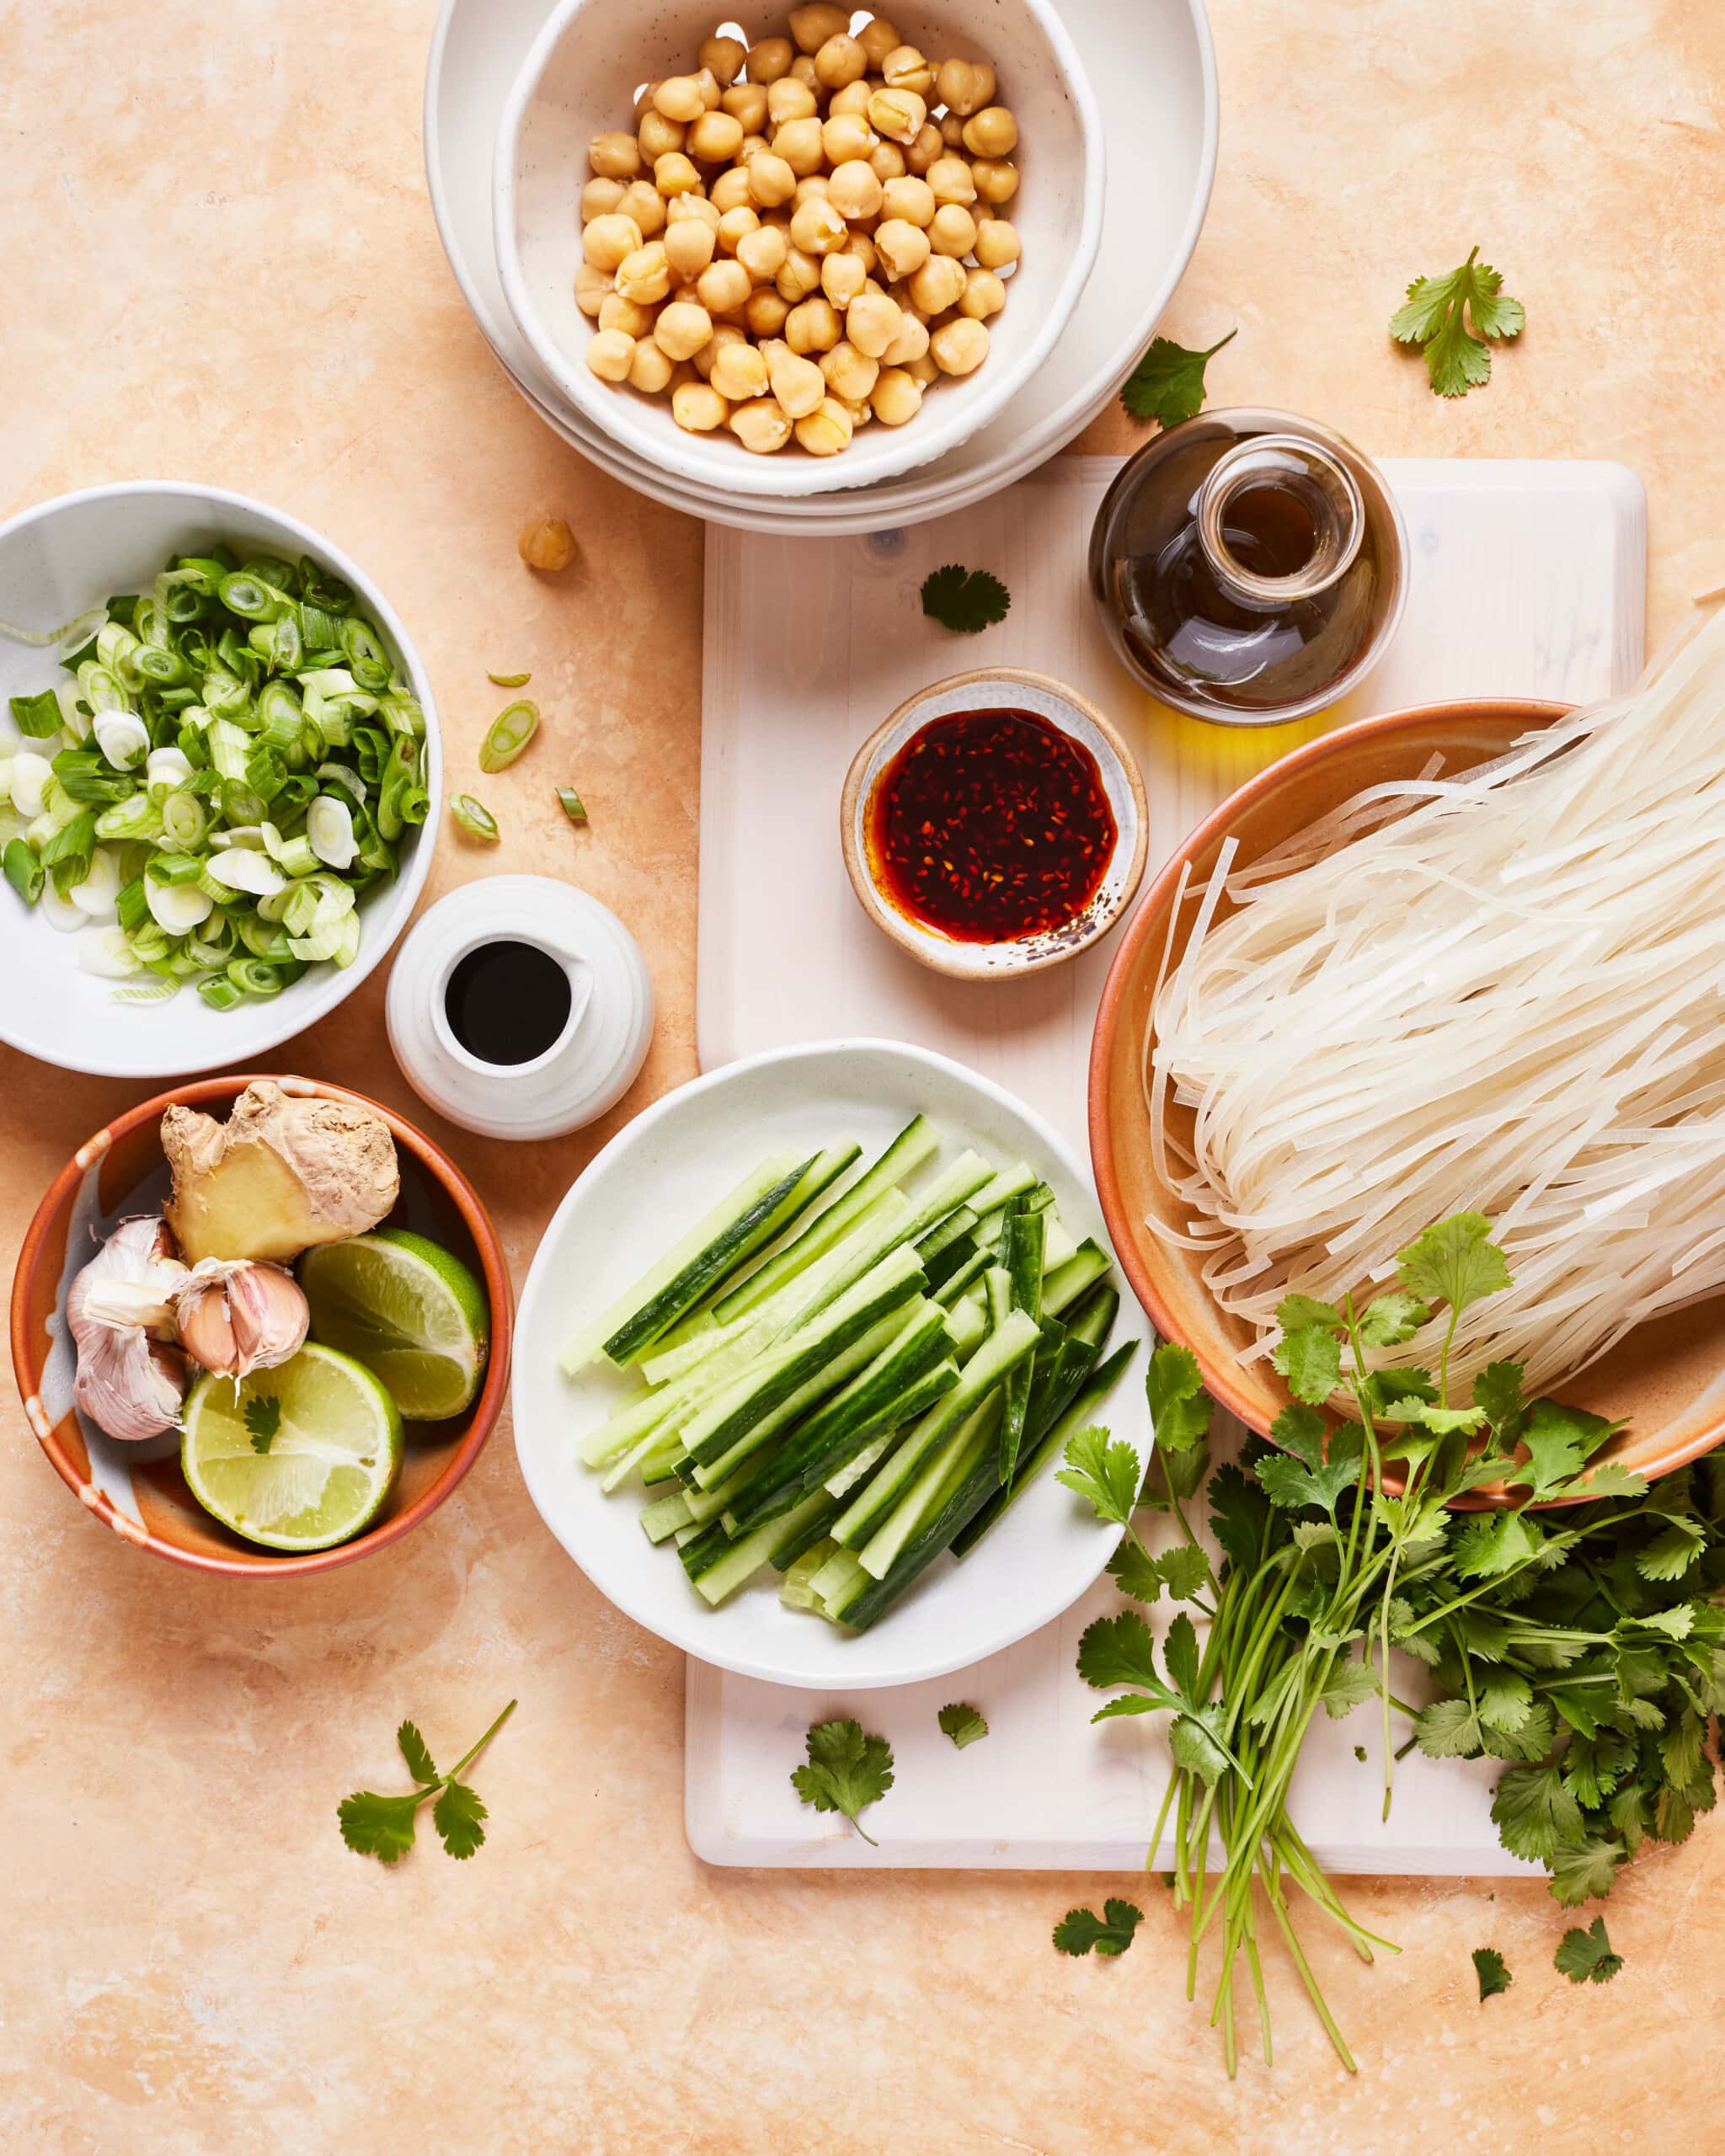 Ingredients for chili oil noodles